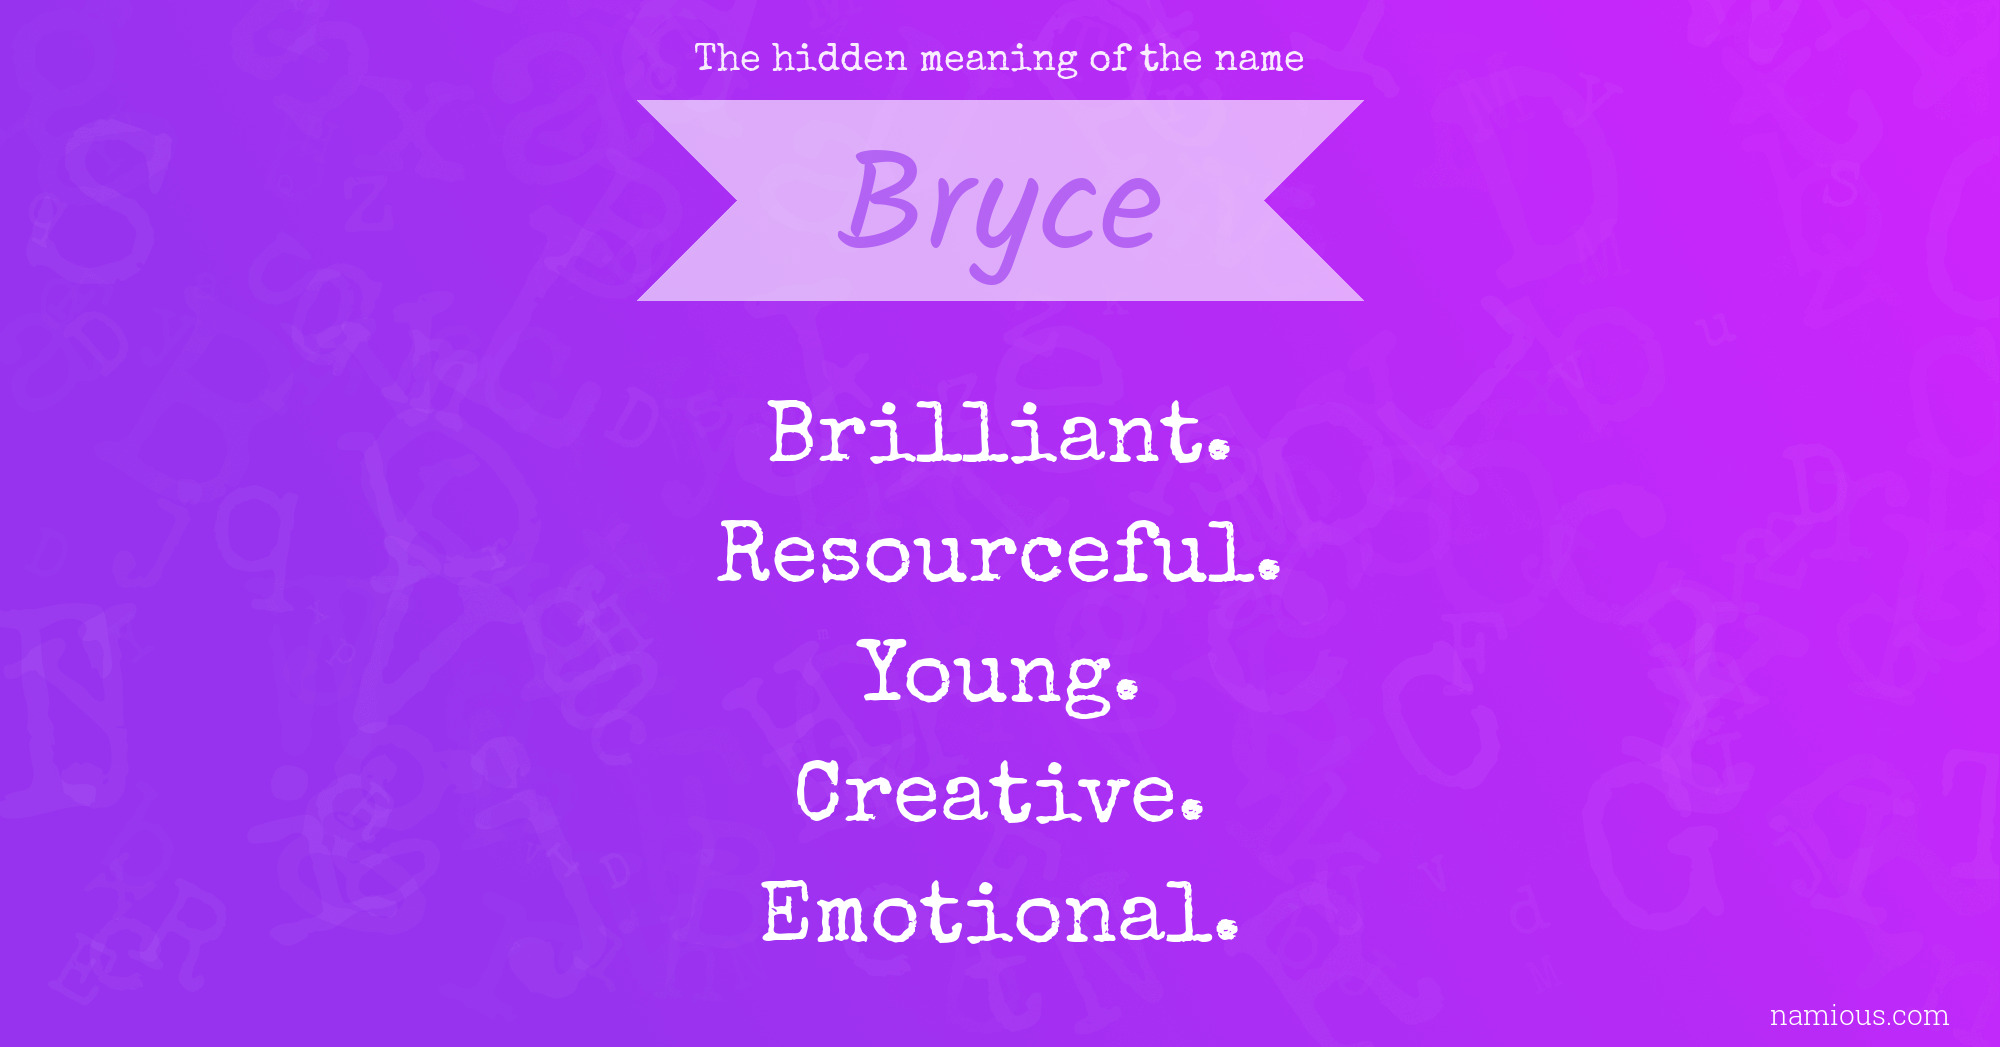 The hidden meaning of the name Bryce